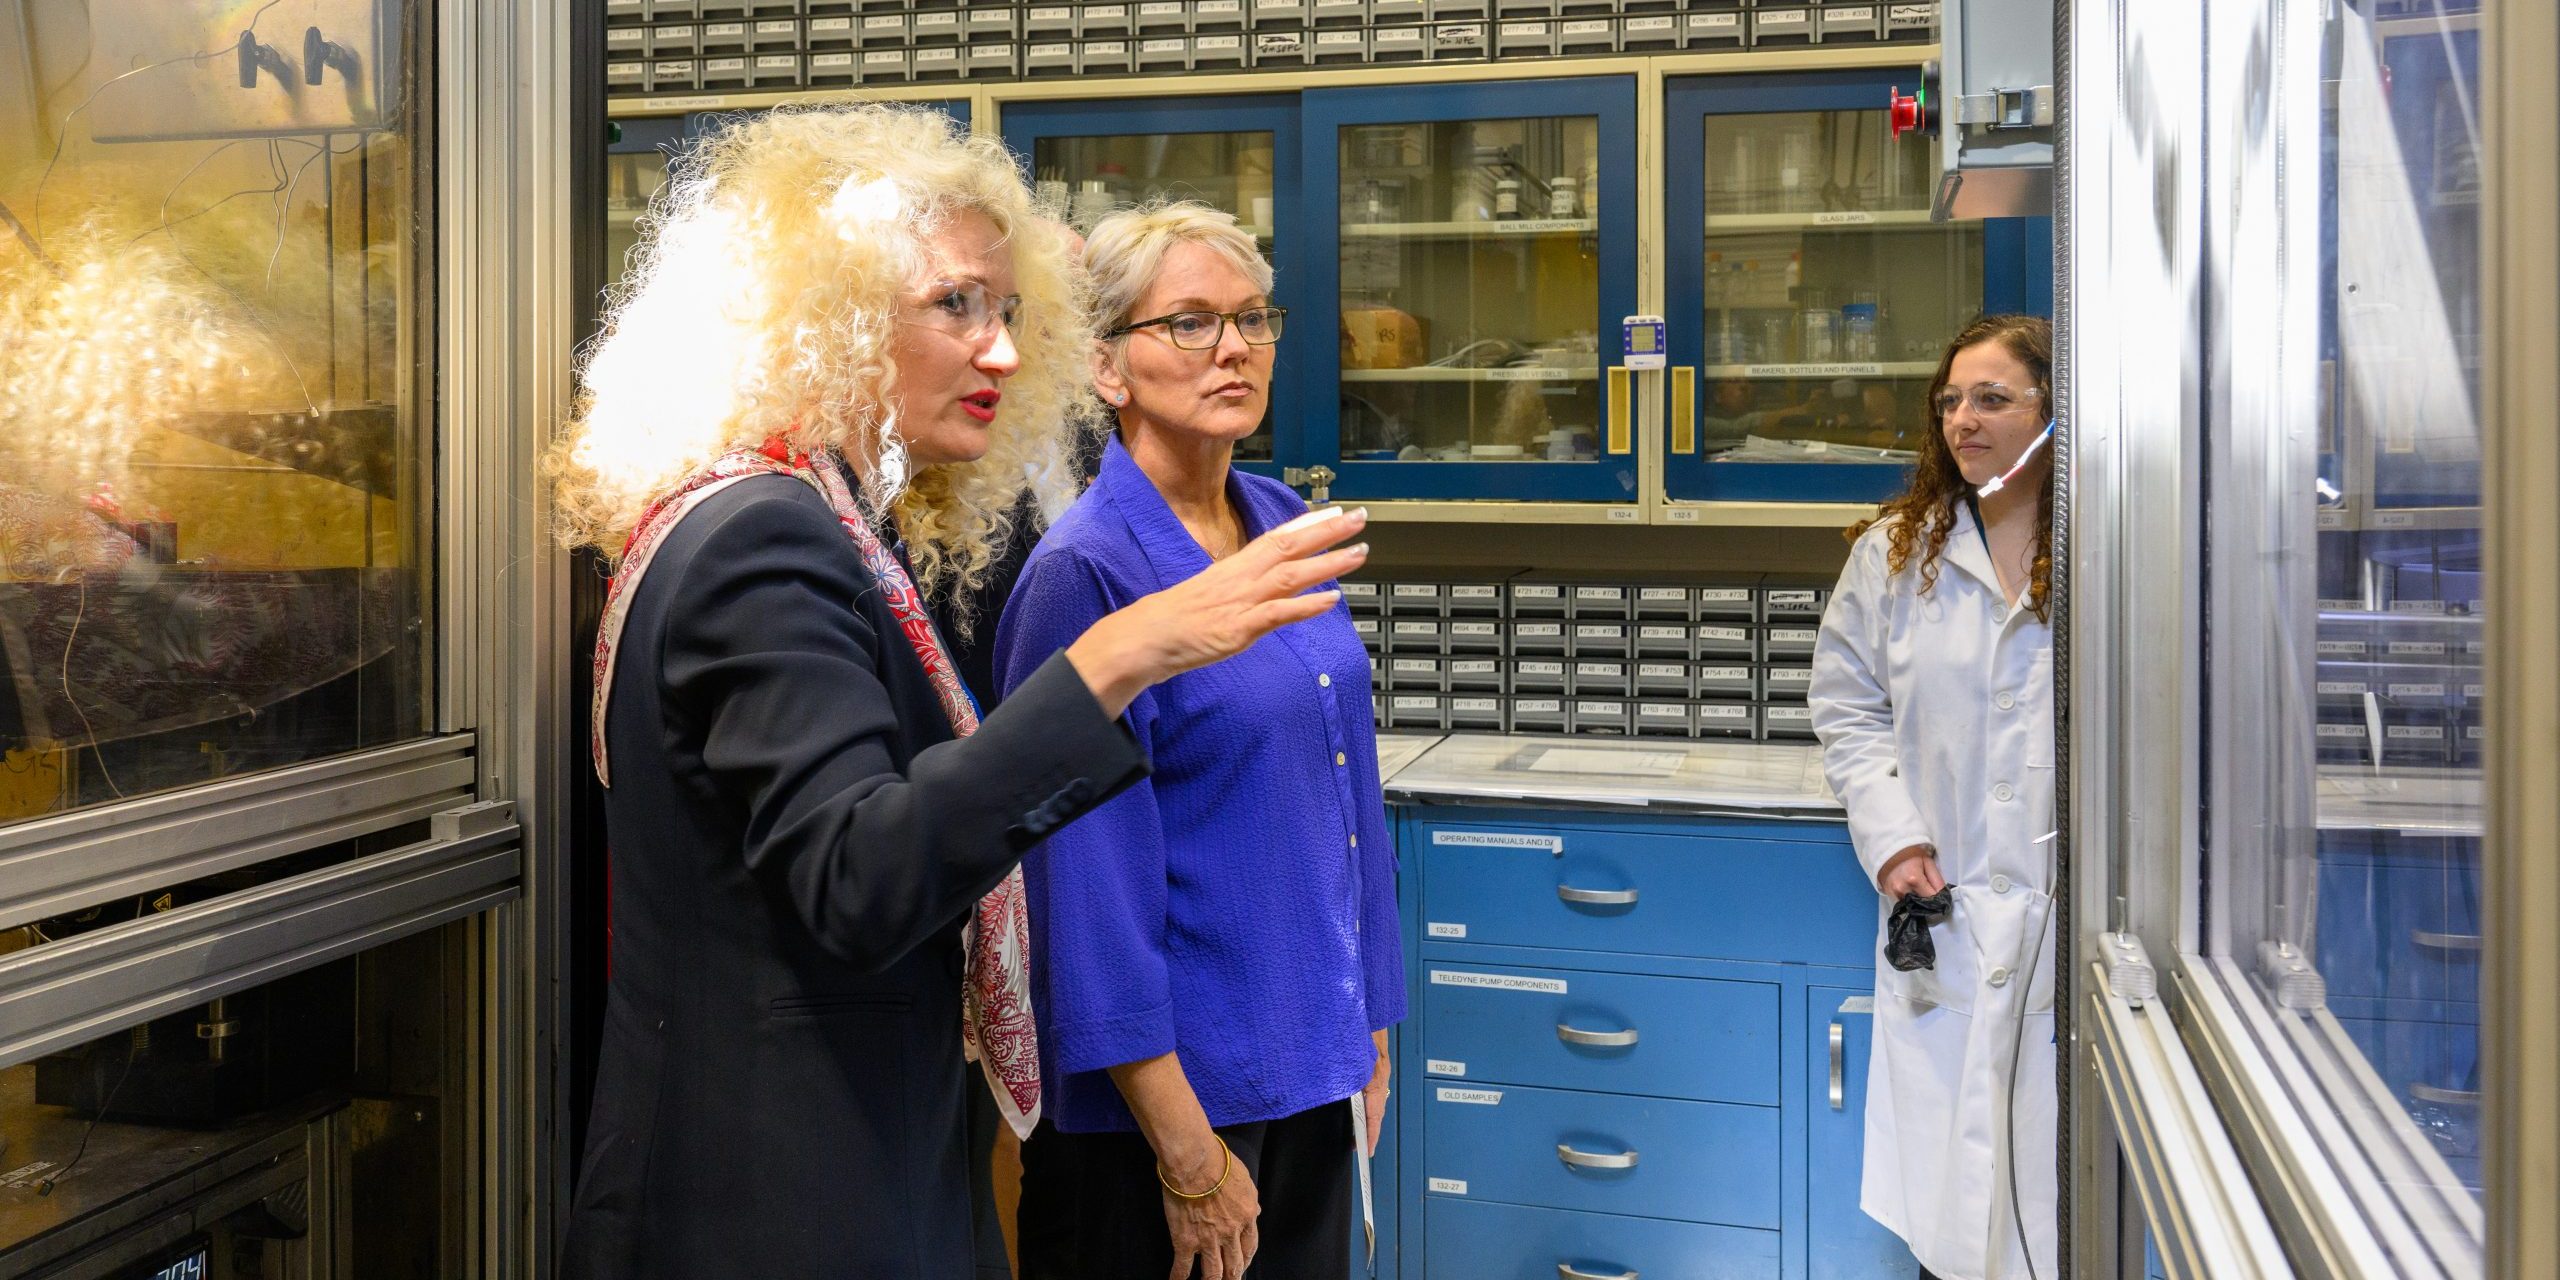 Radenka Maric, interim president, gives U.S. Secretary of Energy Jennifer Granholm at tour of her lab during a visit to the Center for Clean Energy Engineering